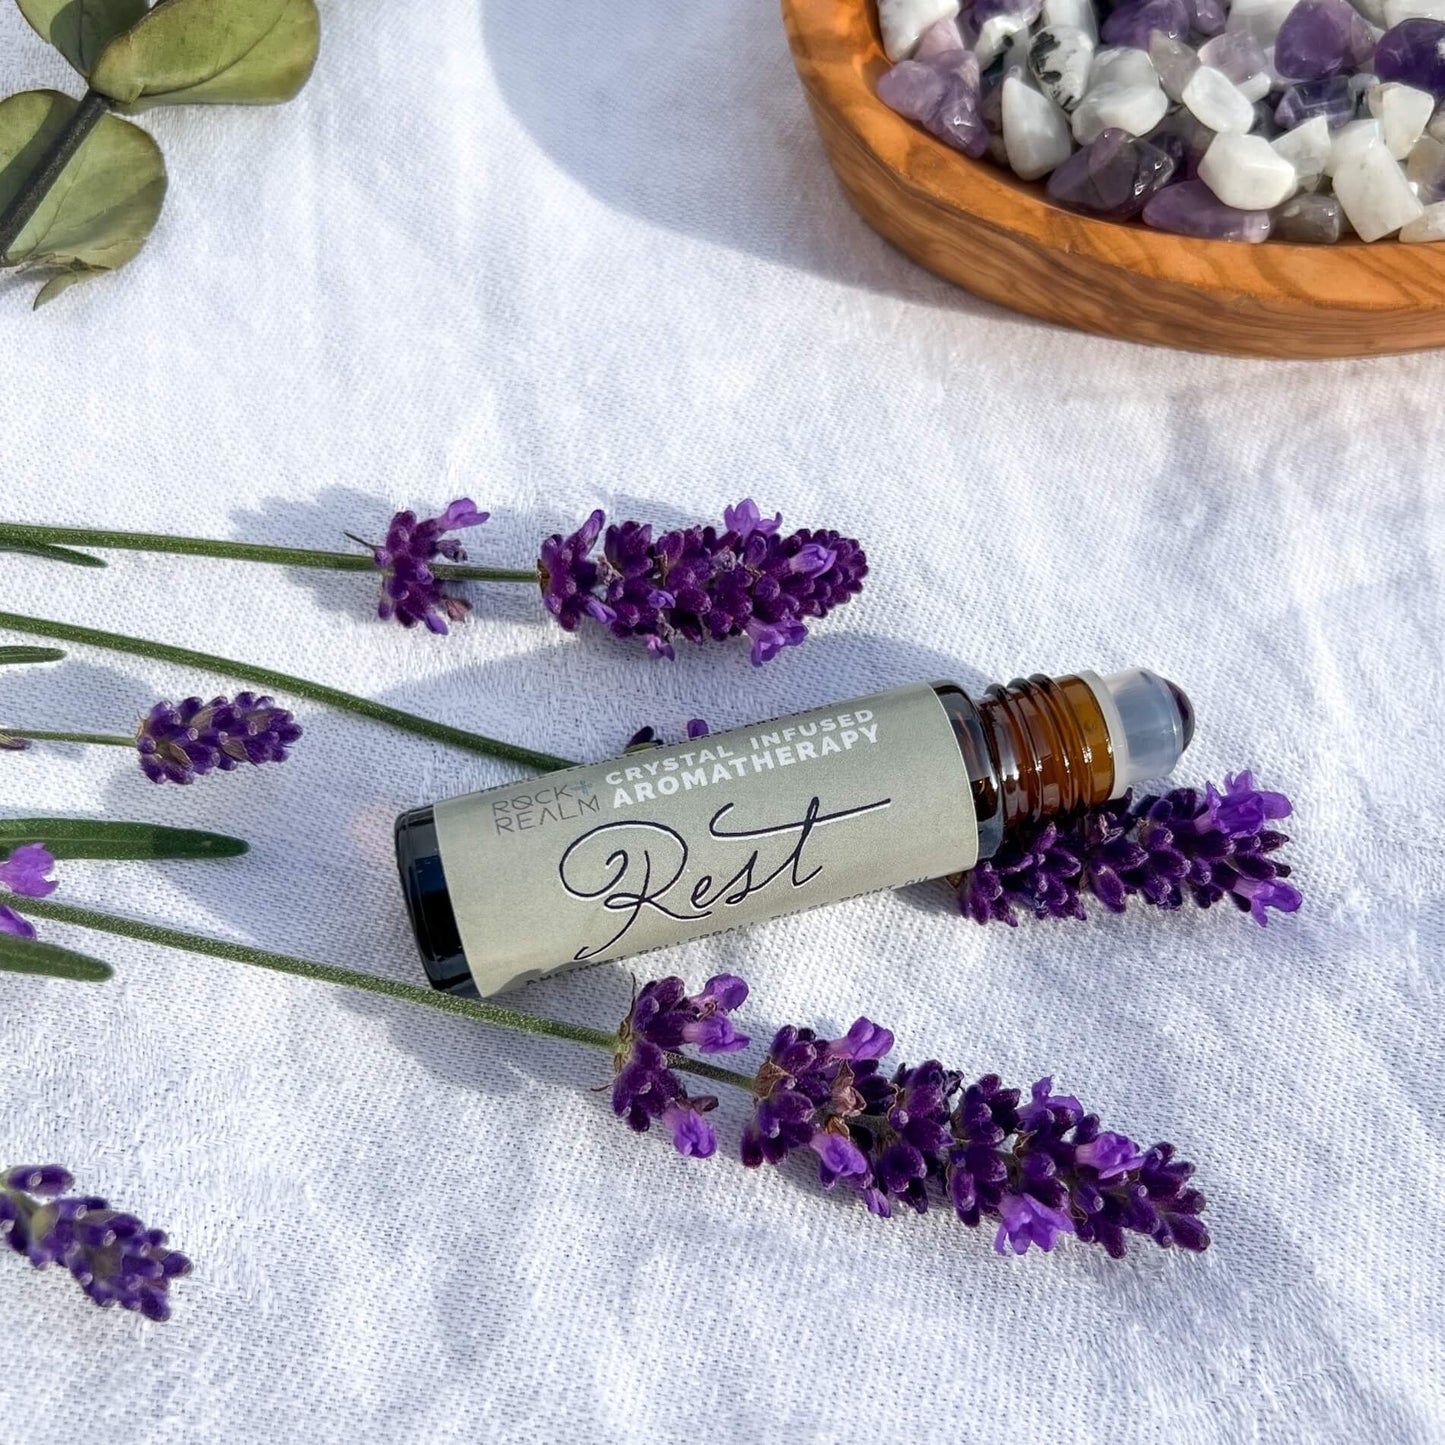 REST Crystal Aromatherapy Oil Roller